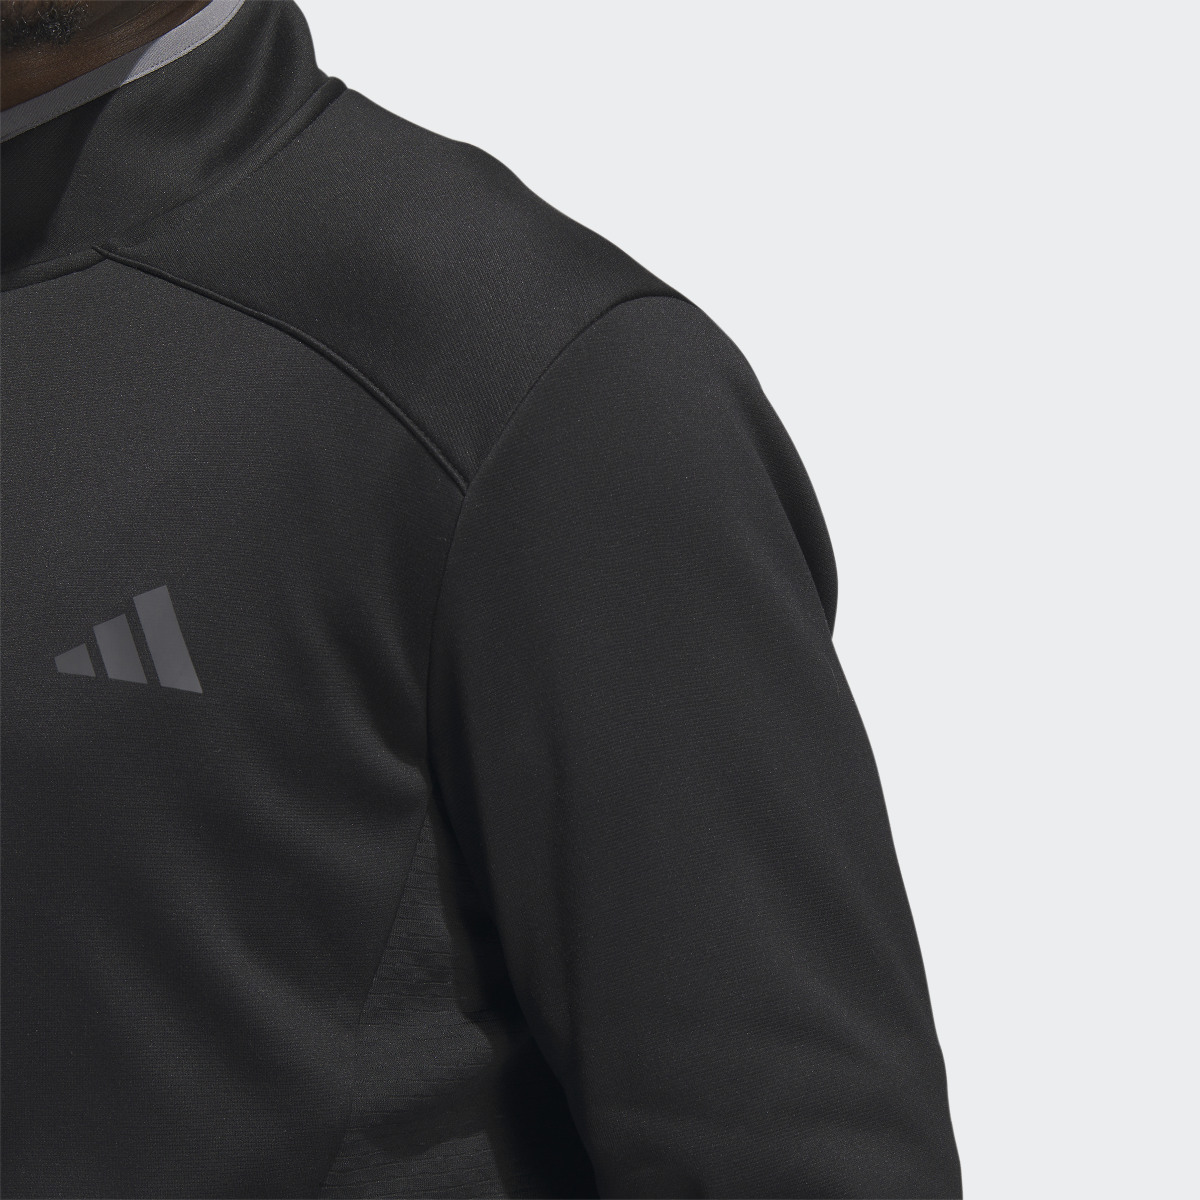 Adidas COLD.RDY Full-Zip Jacket. 7